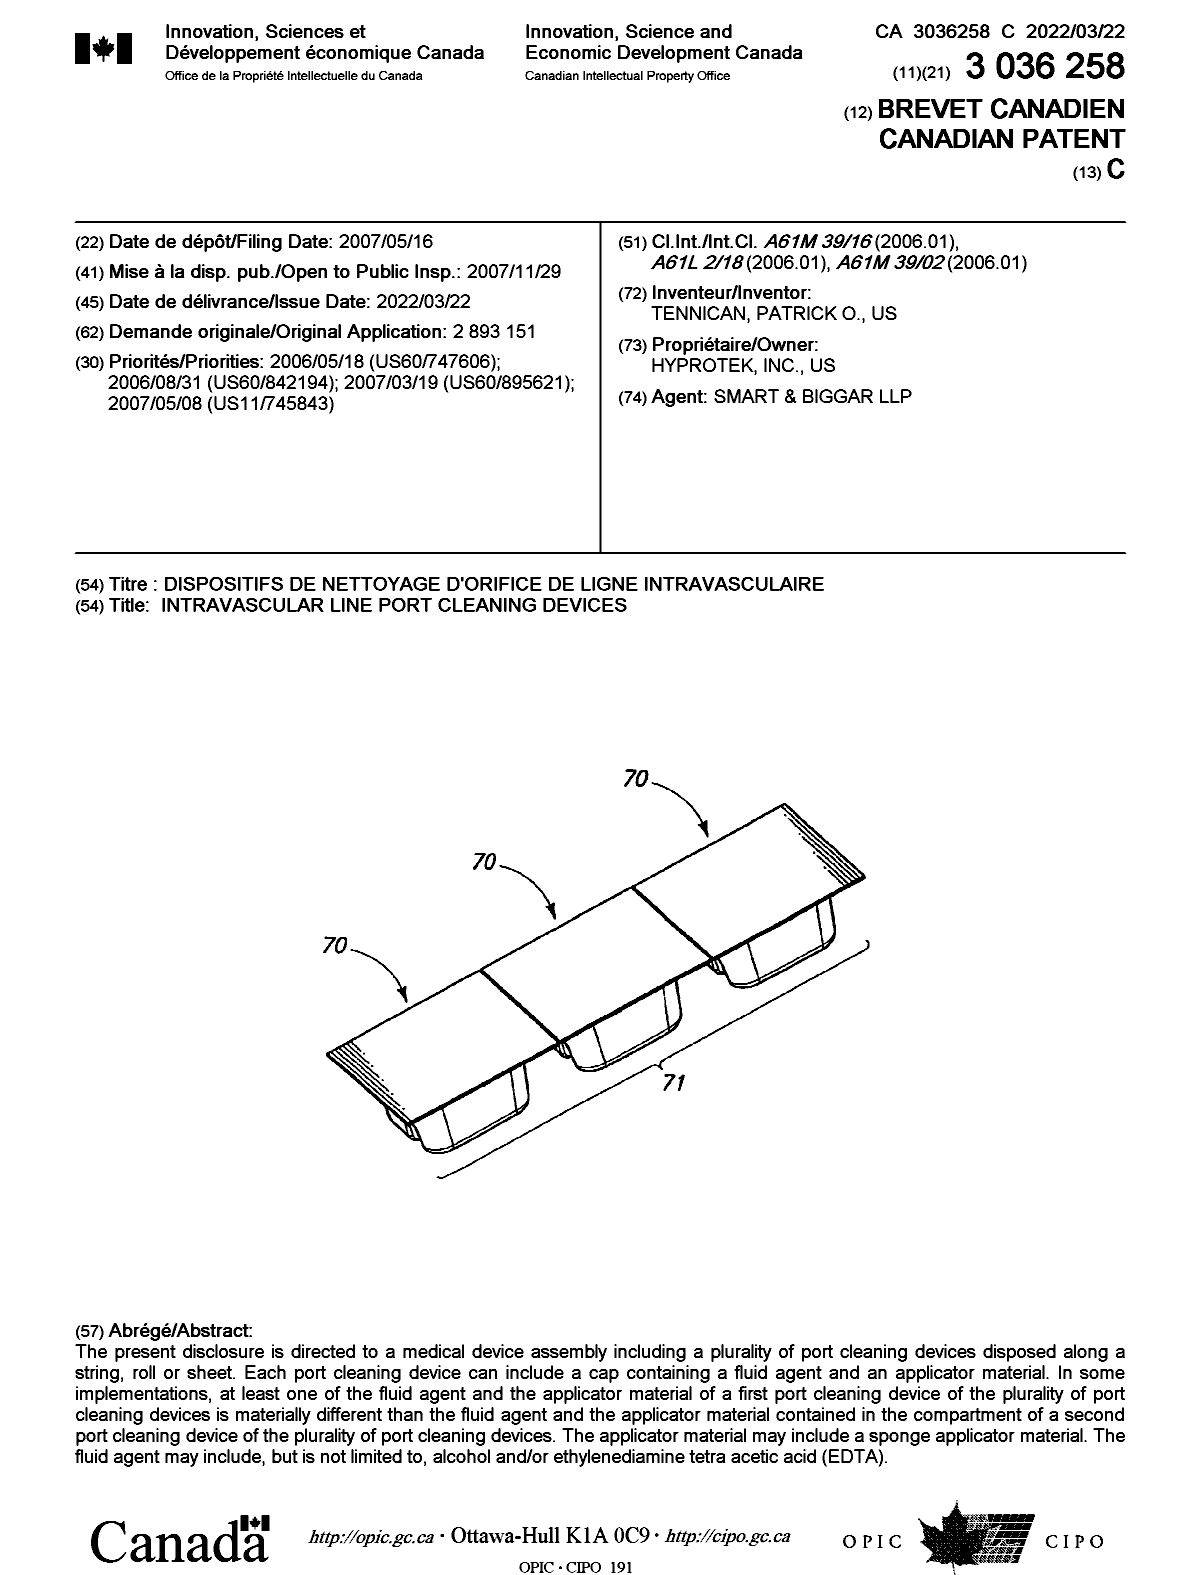 Canadian Patent Document 3036258. Cover Page 20220223. Image 1 of 1